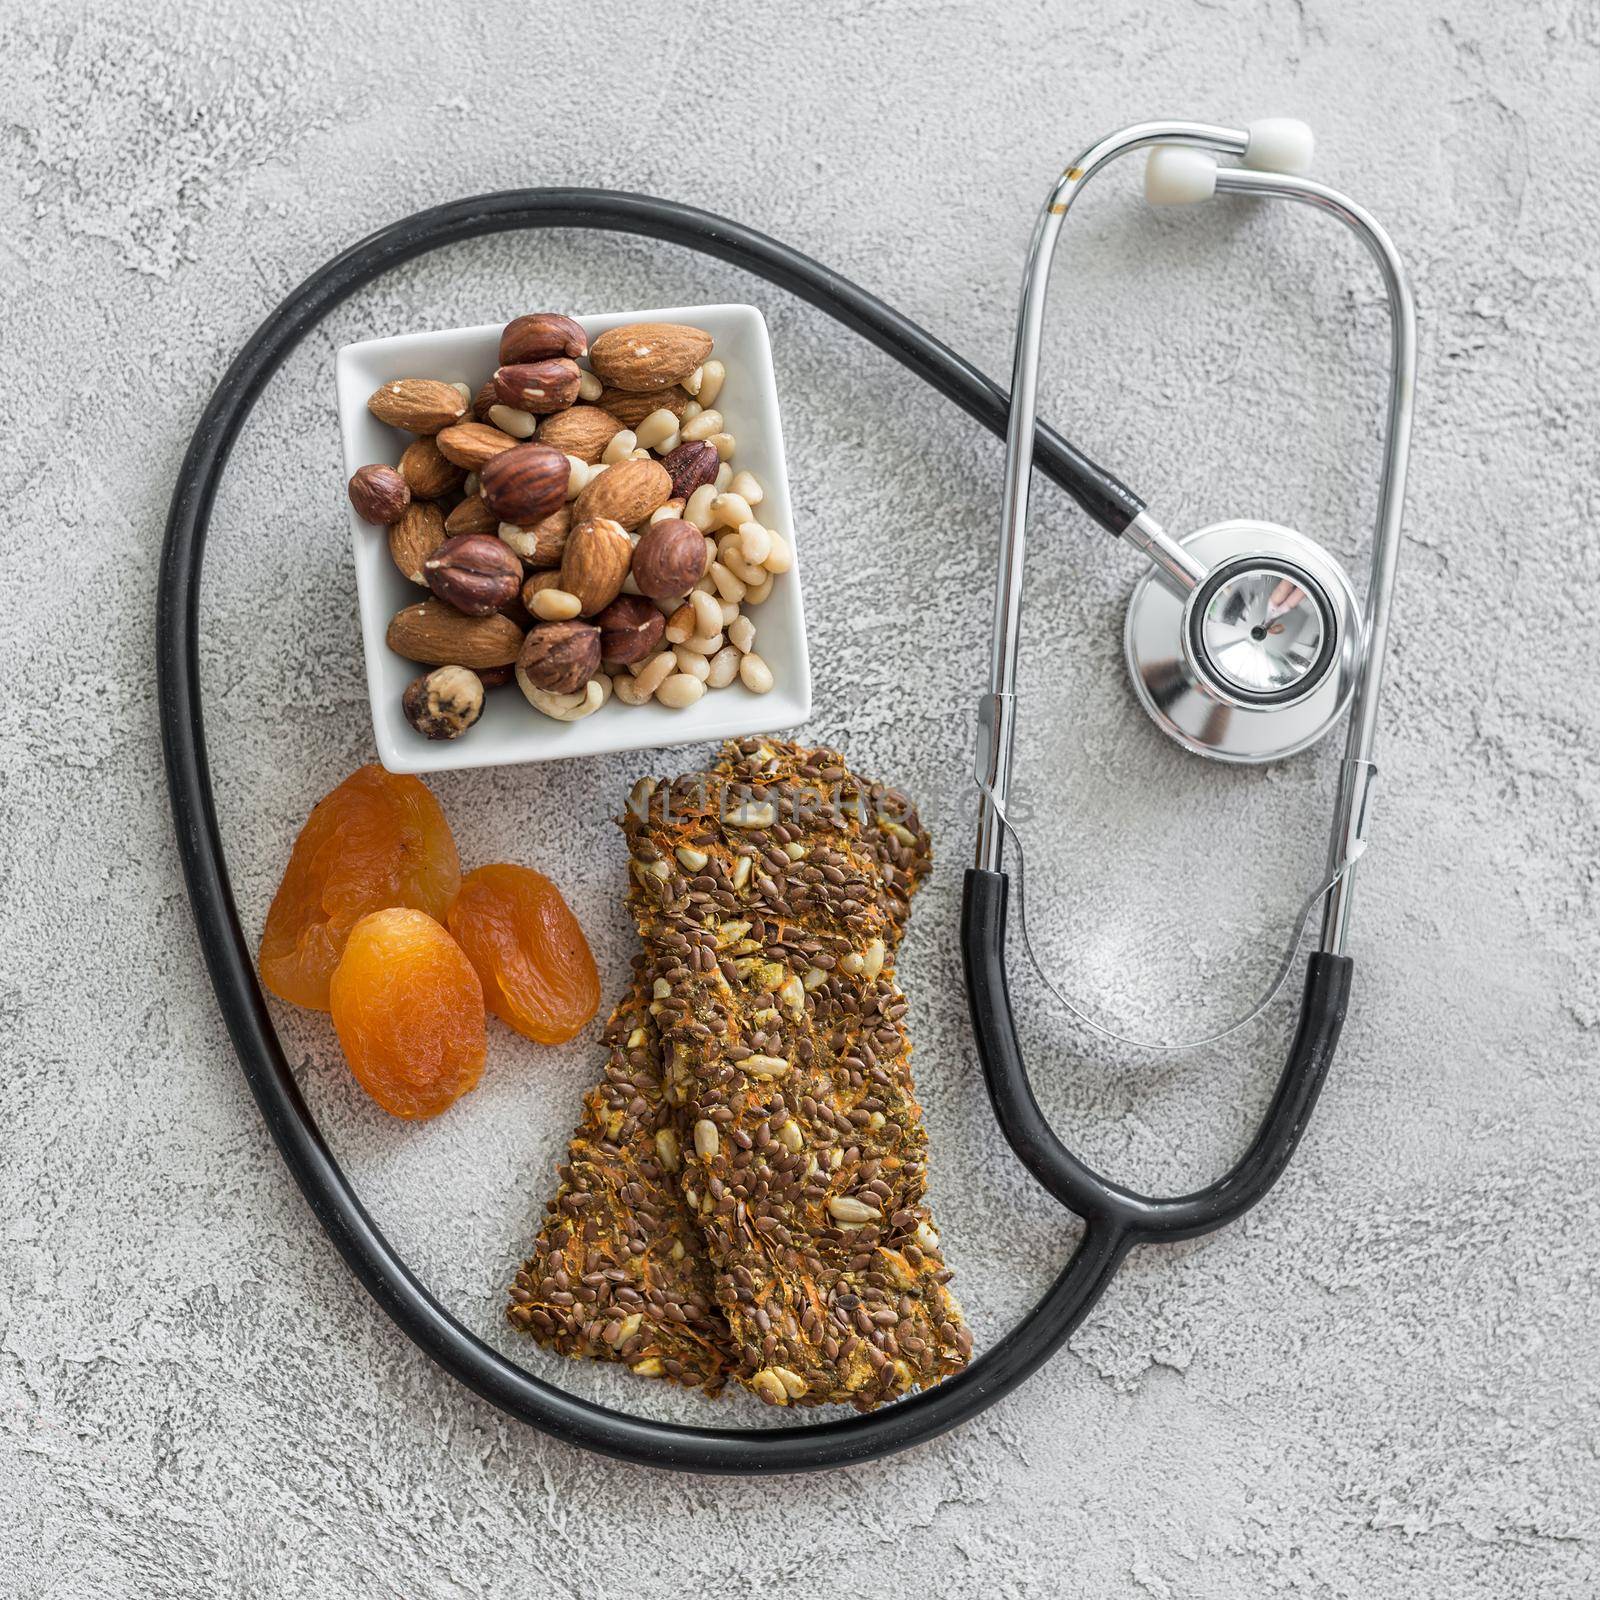 Stethoscope and heart with dried fruits and nuts on a gray background. Medicine concept